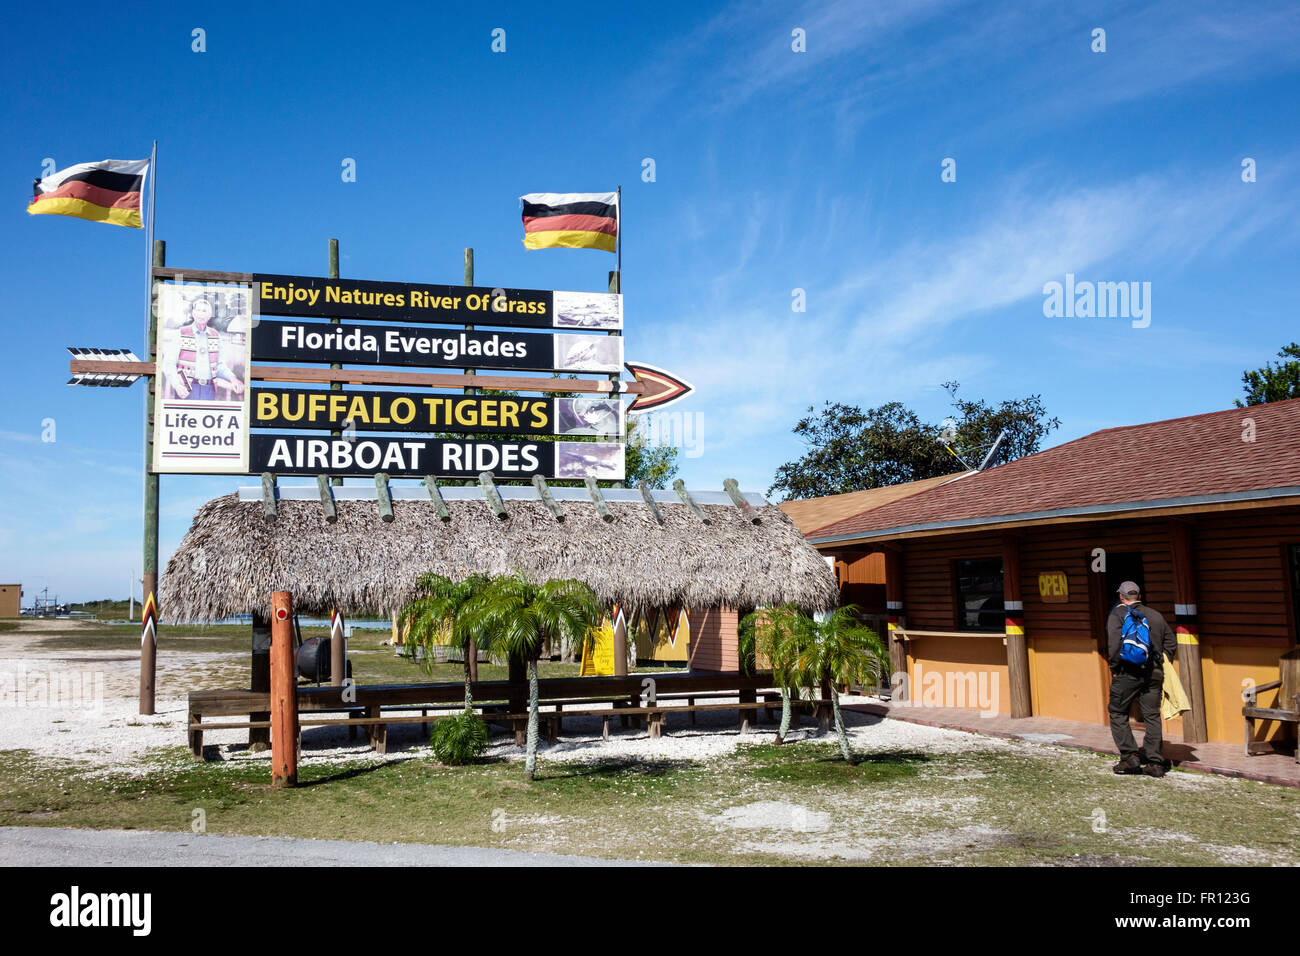 Florida Everglades,Tamiami Trail,Miccosukee Seminole Tribe Reservation,Native American Indian indigenous peoples,sign,Buffalo Tiger's airboat rides,fl Stock Photo